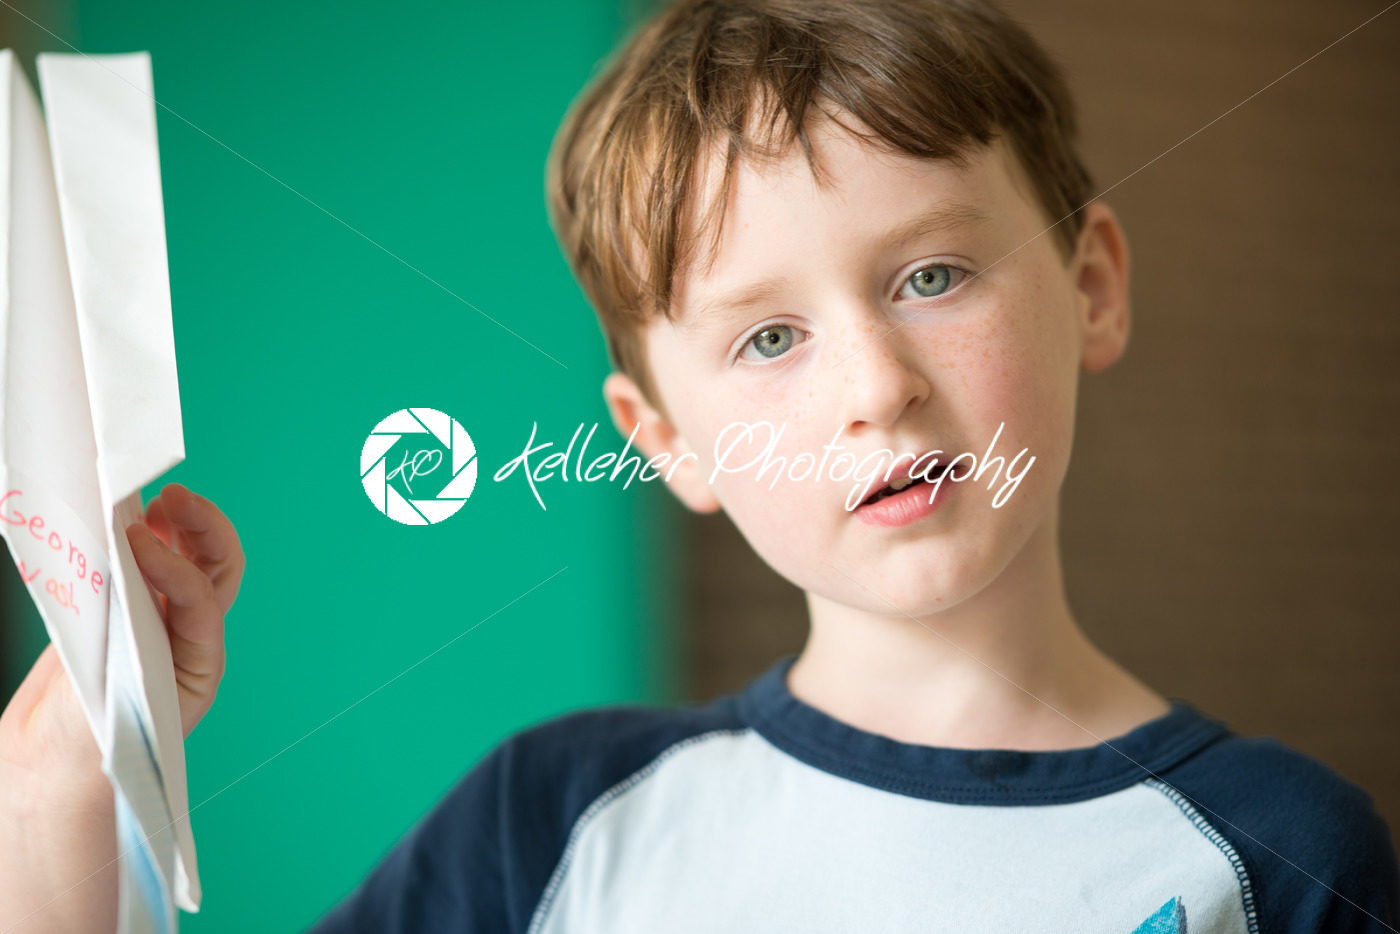 Young boy holding paper plane - Kelleher Photography Store